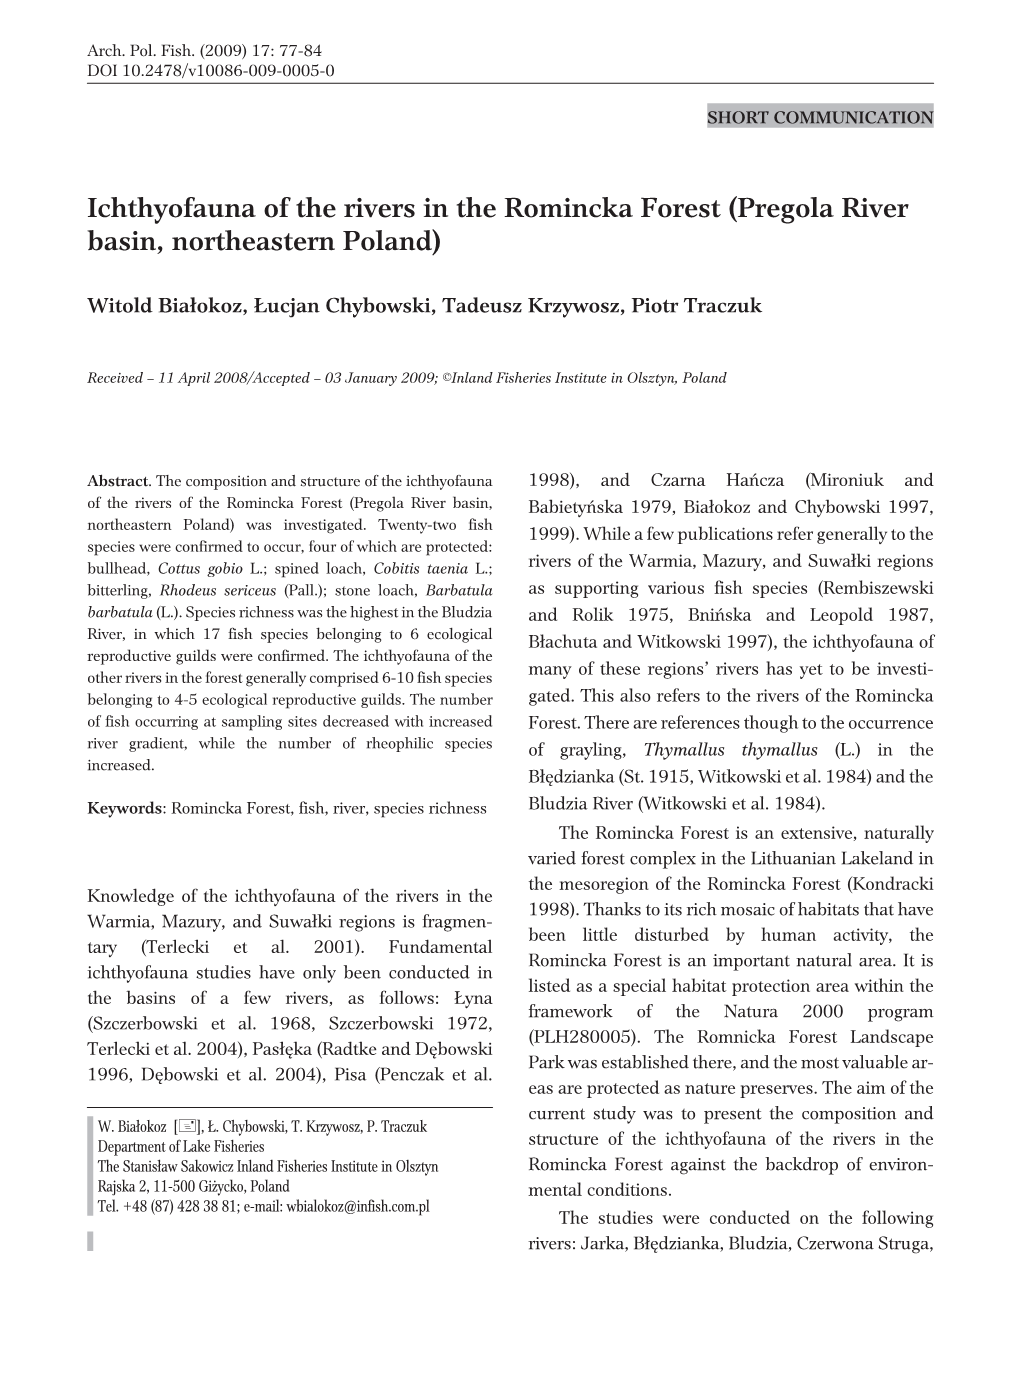 Ichthyofauna of the Rivers in the Romincka Forest (Pregola River Basin, Northeastern Poland)